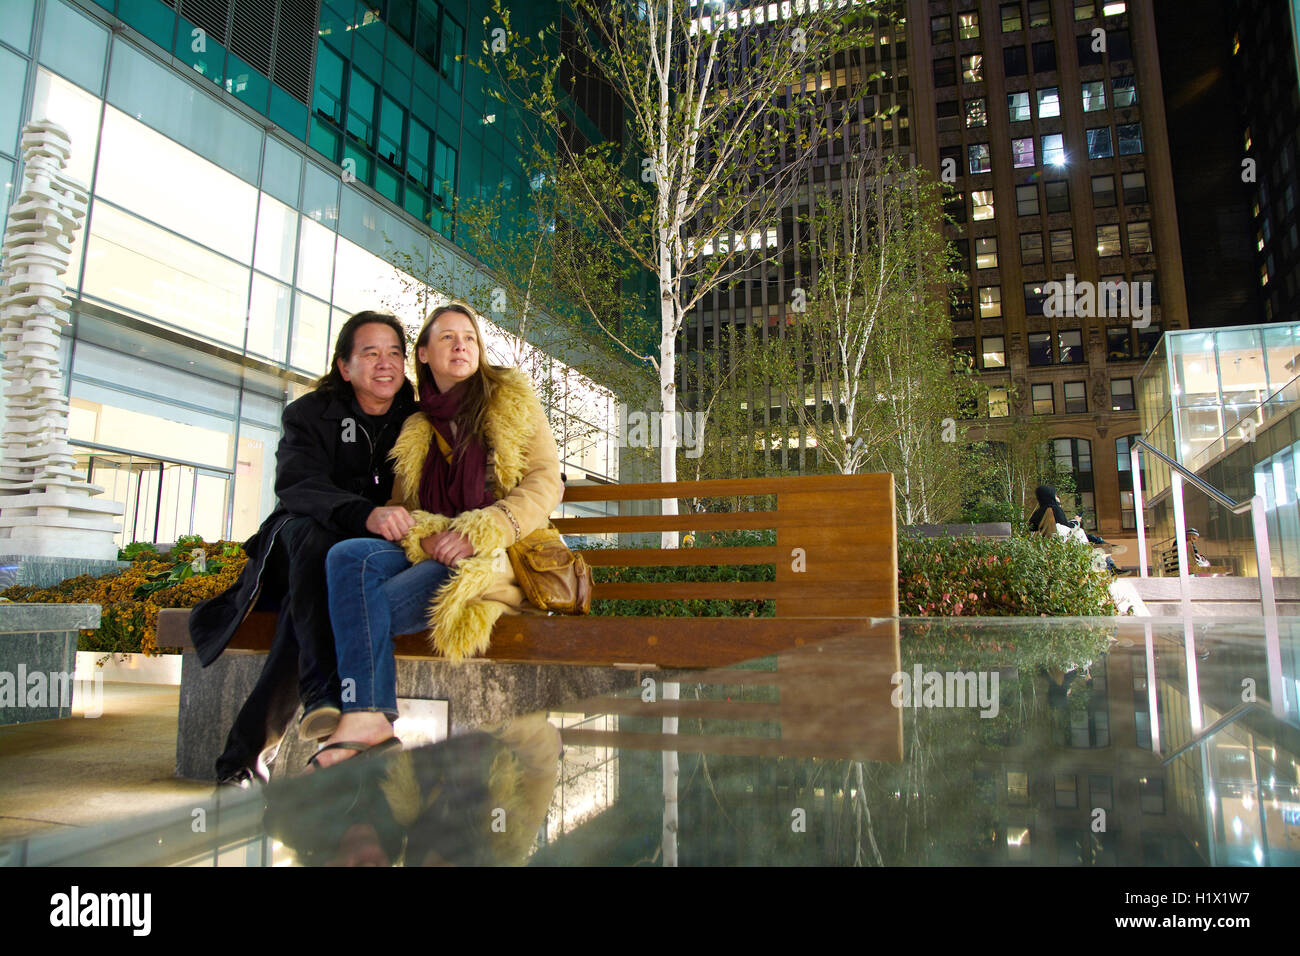 photography stock and hi-res - Manhattan bench Alamy images